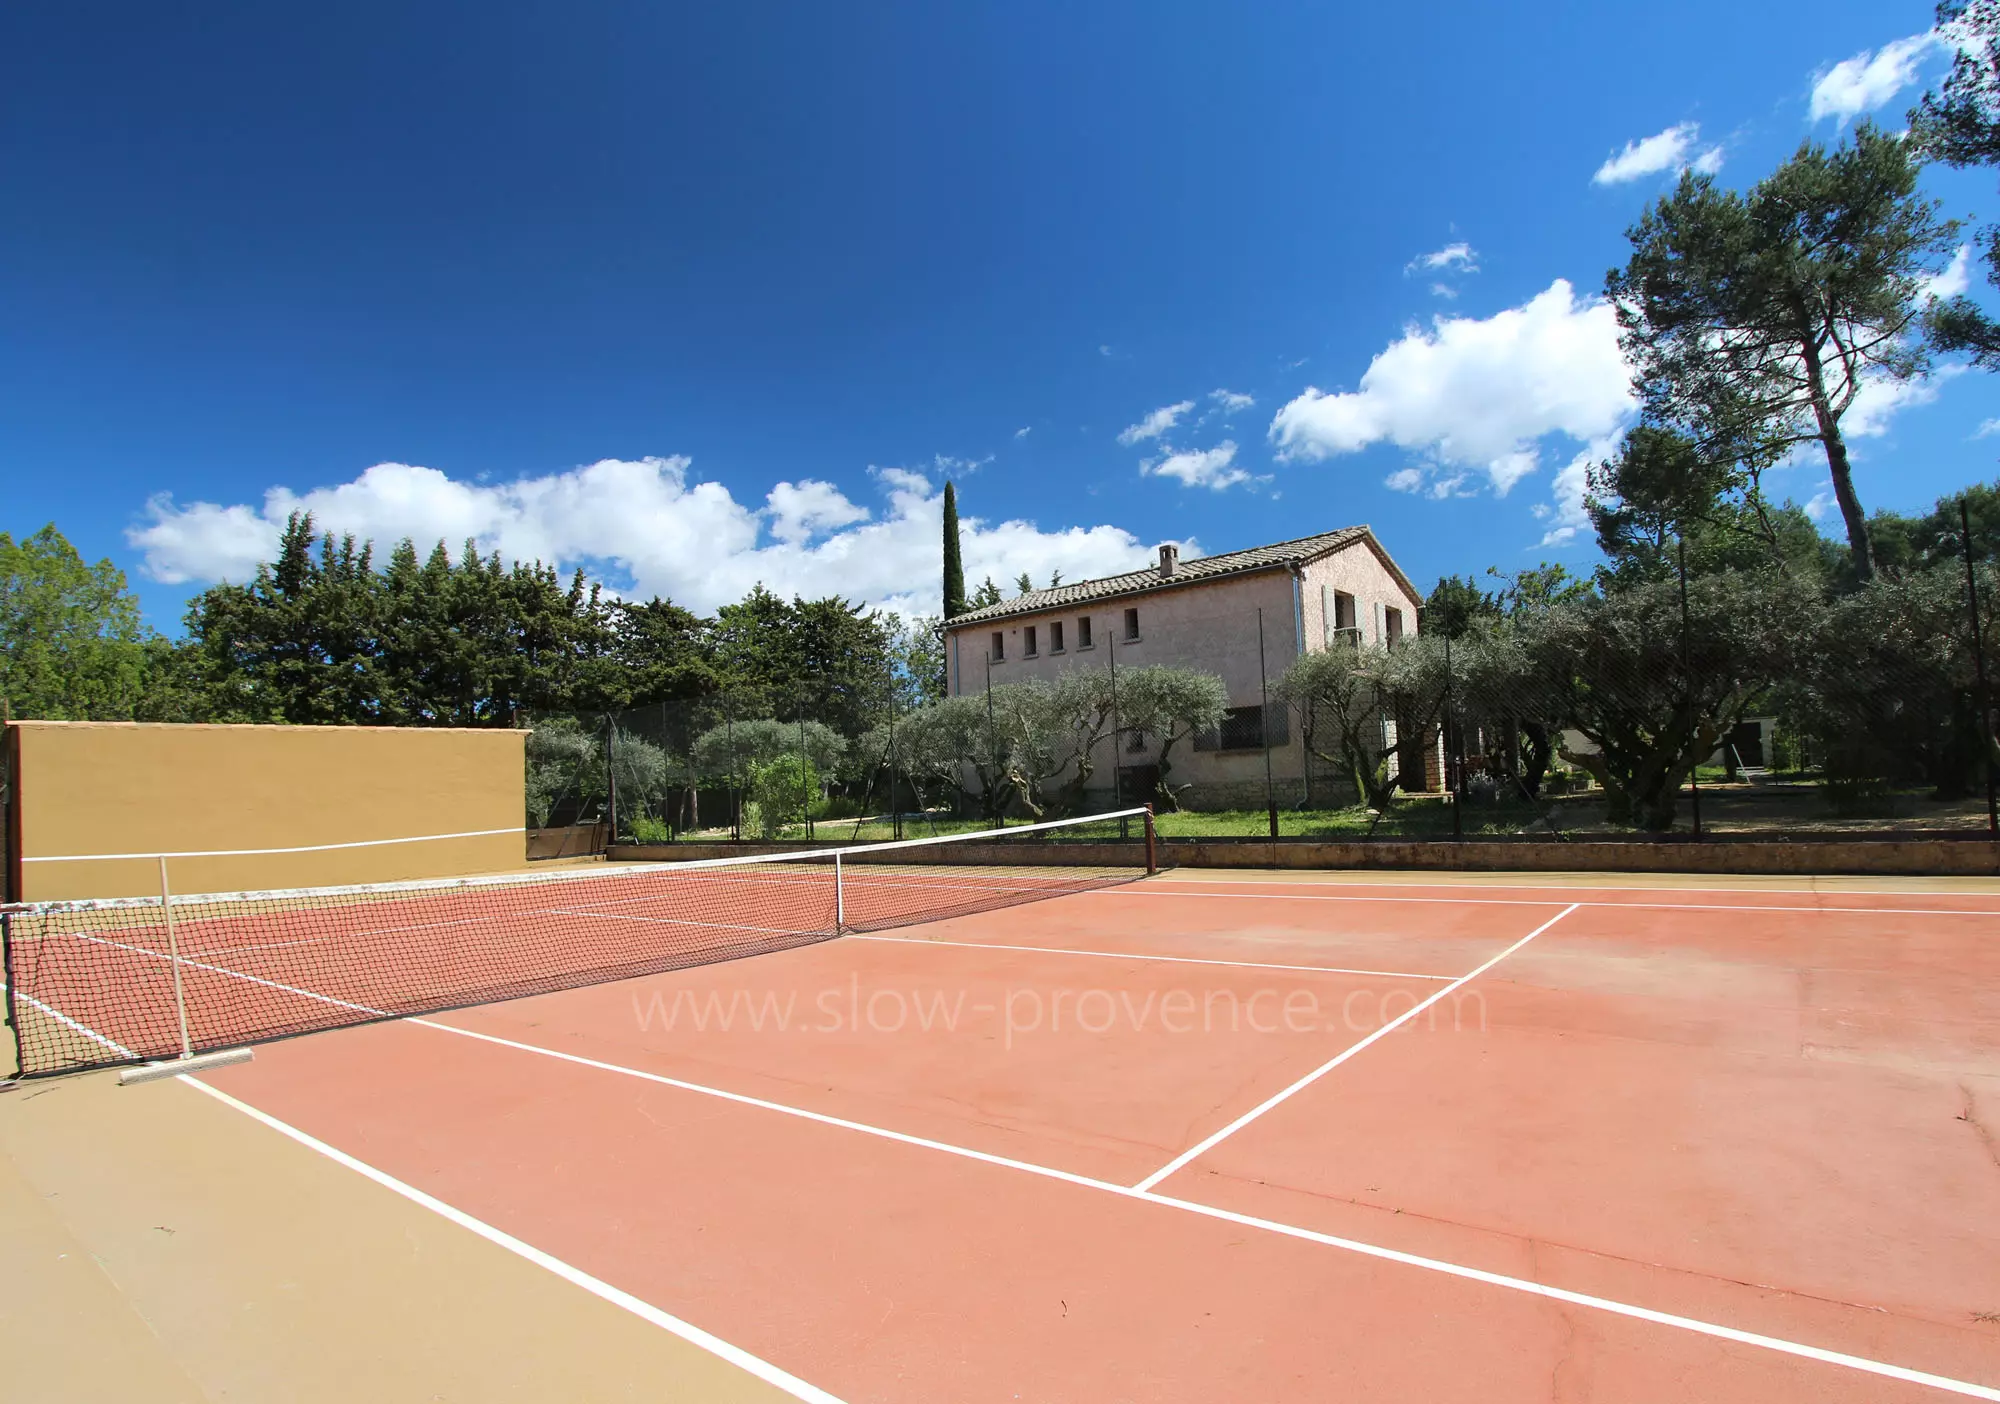 The tennis court surrounded by olive trees